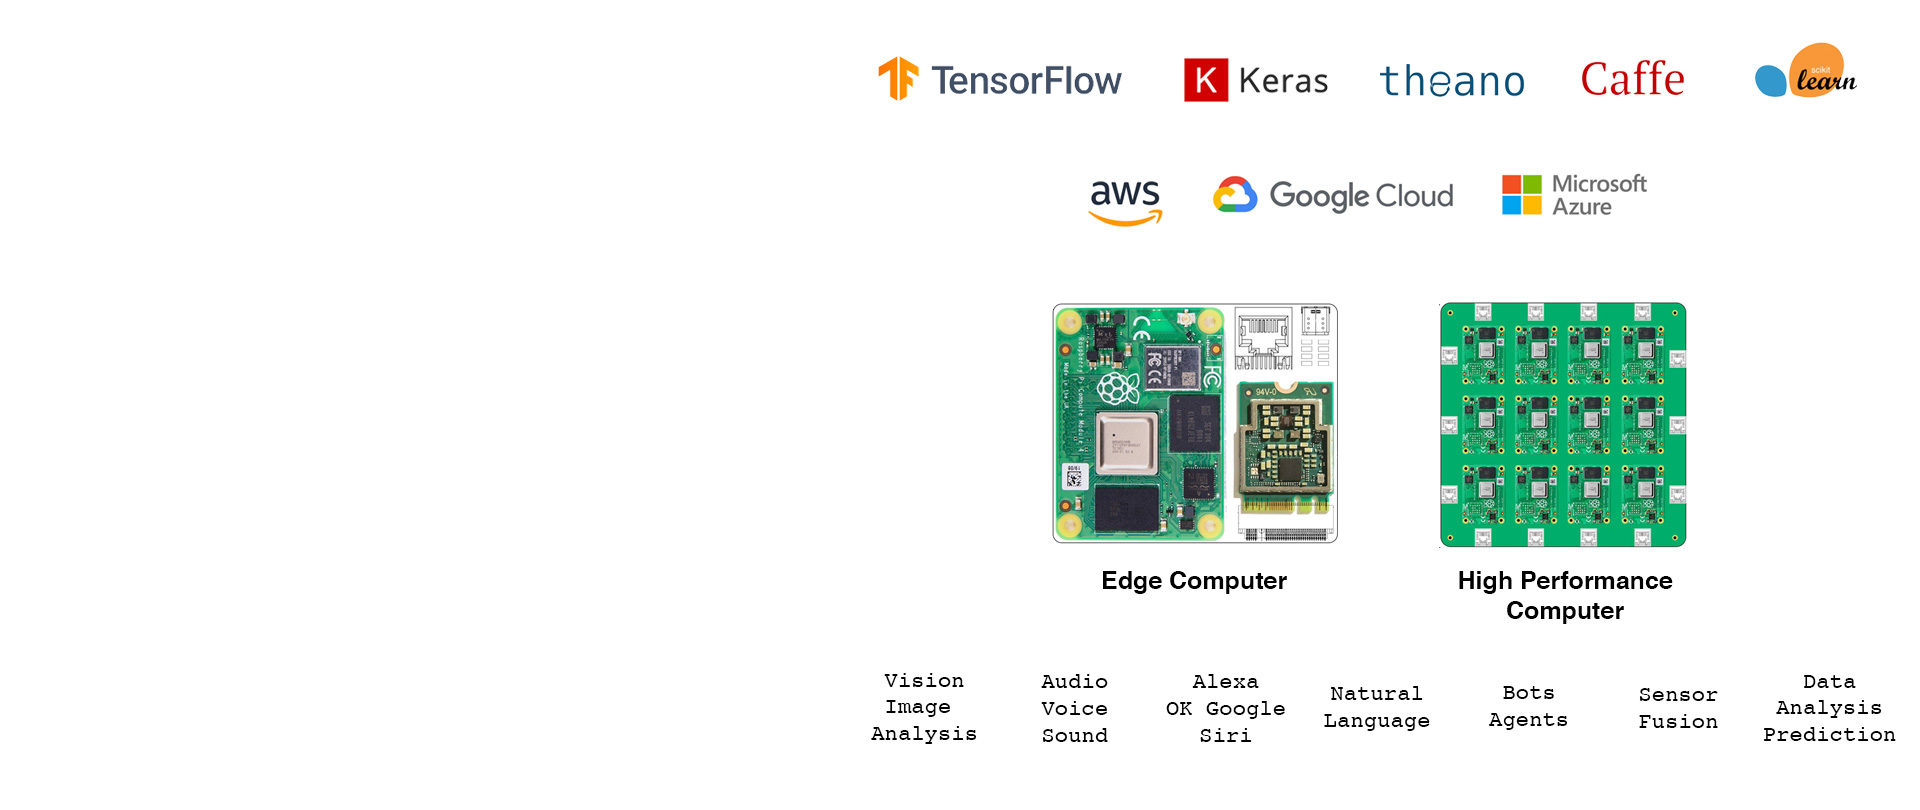 artificial intelligence with tensorflow and keras using edge computers and high performance computers